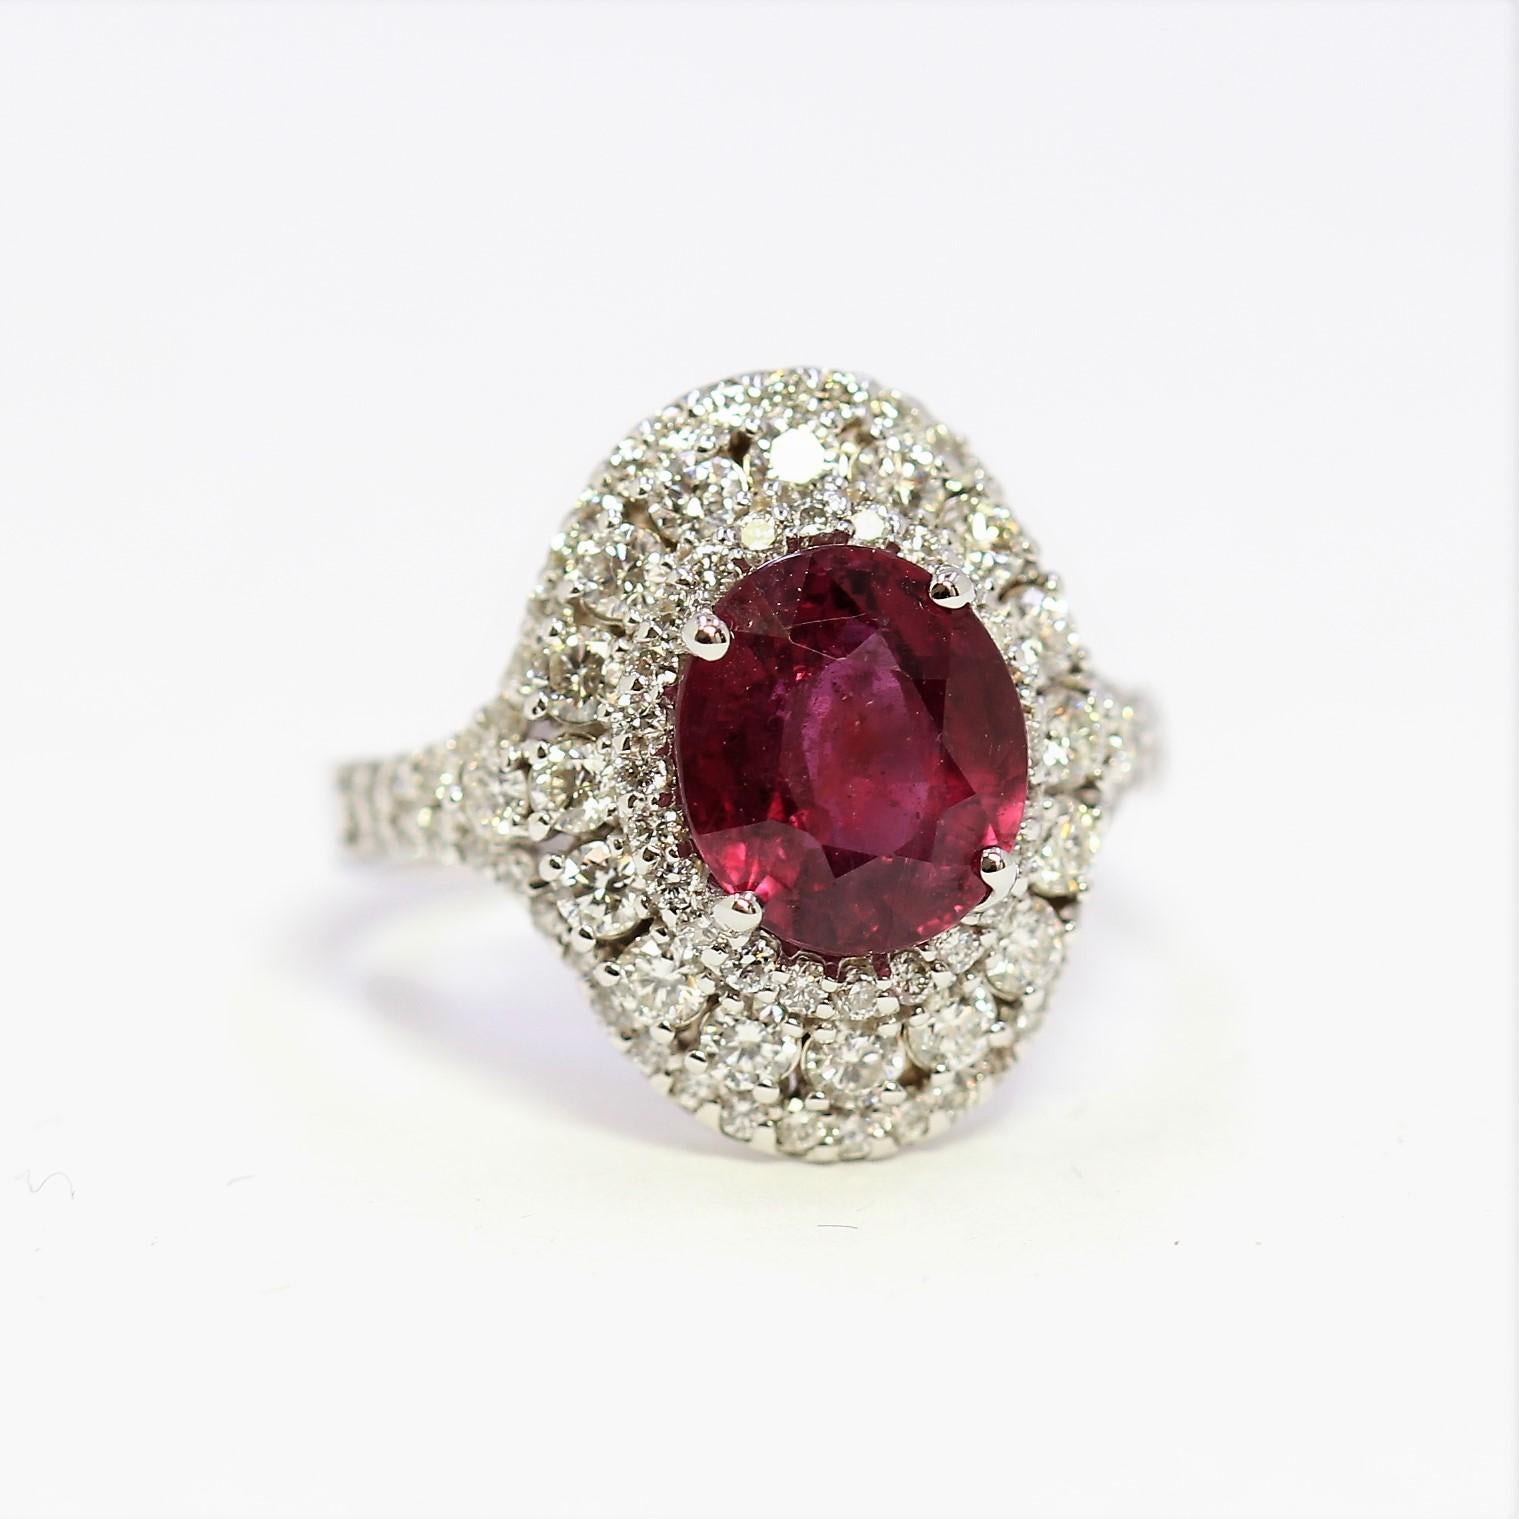 14K White Gold 4.83gm / Diamond 2.28ct / NATURAL Ruby 3.42ct #GVR1685
Mounted in 14K white gold, a 3.42ct Natural ruby, a king of precious stone, brightly catches the light. A sparkling 2.28ct Diamond surround adds a touch of subtle sparkle lending